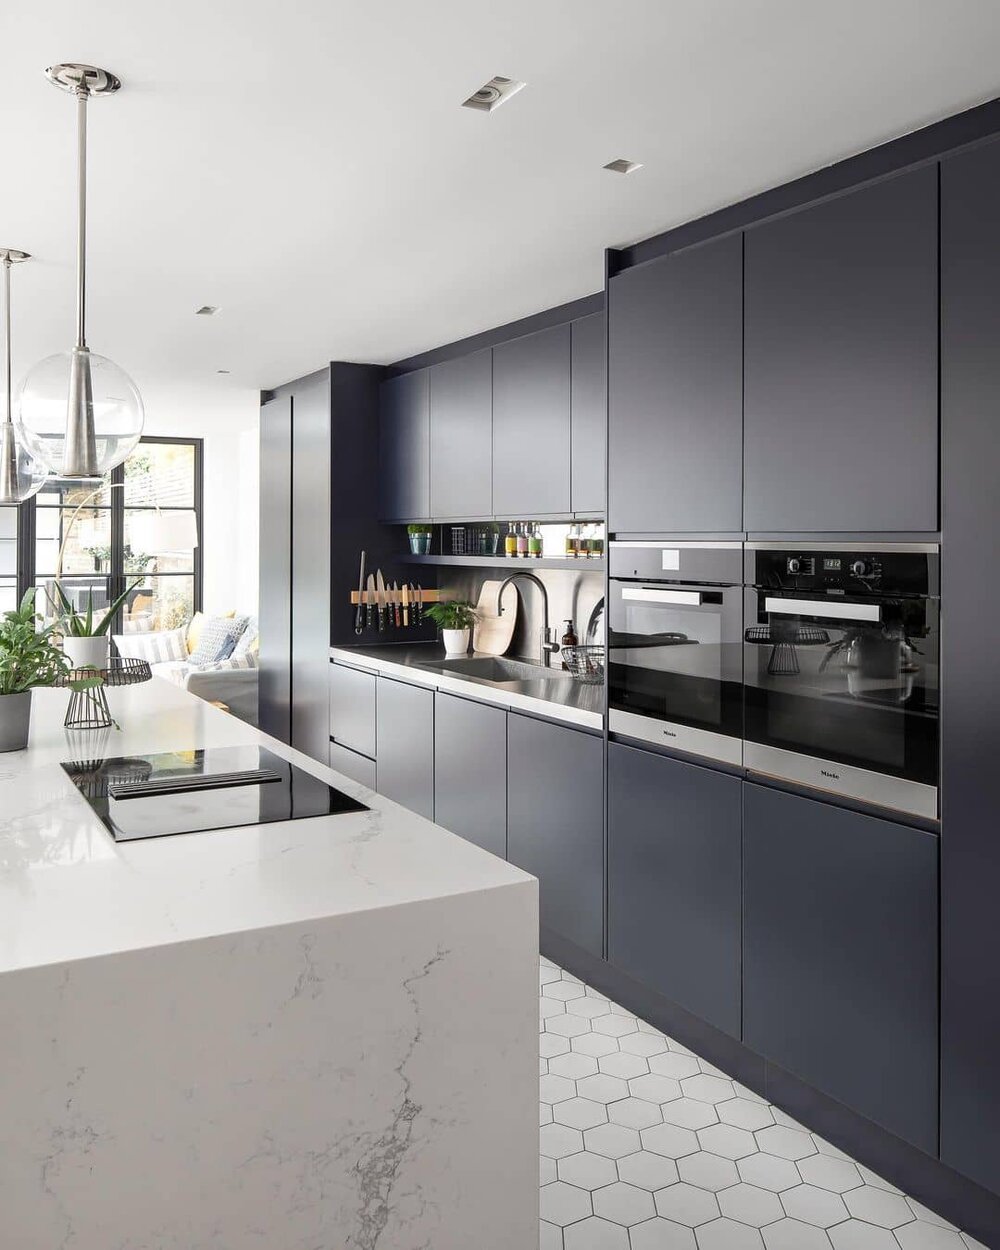 20 modern kitchen ideas for your UK home   Fifi McGee